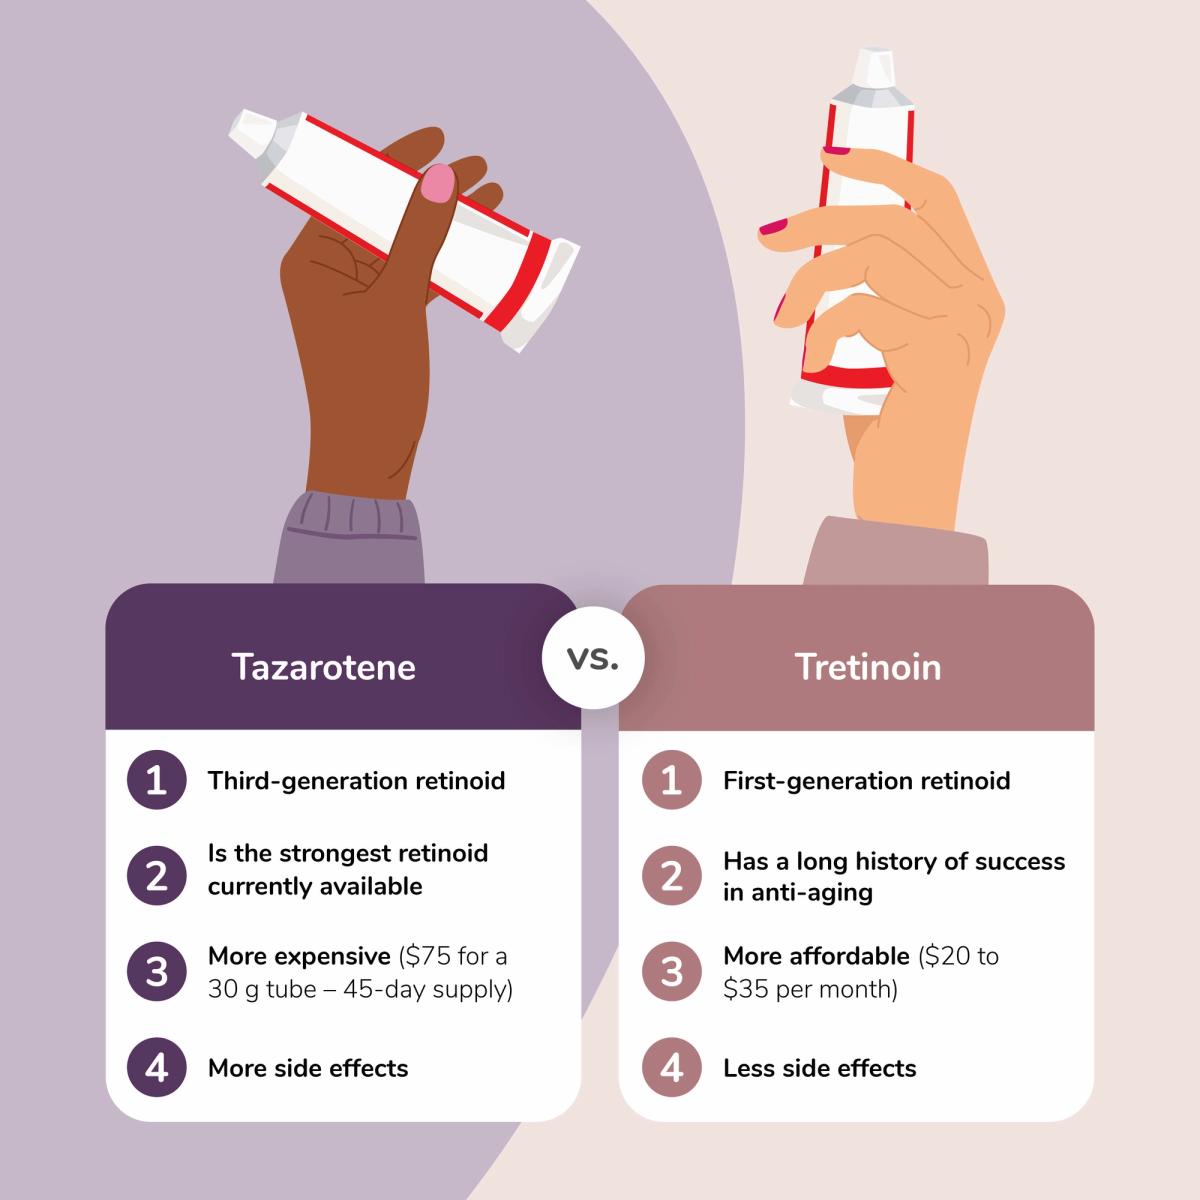 Illustration of the Differences Between Tazarotene and Tretinoin